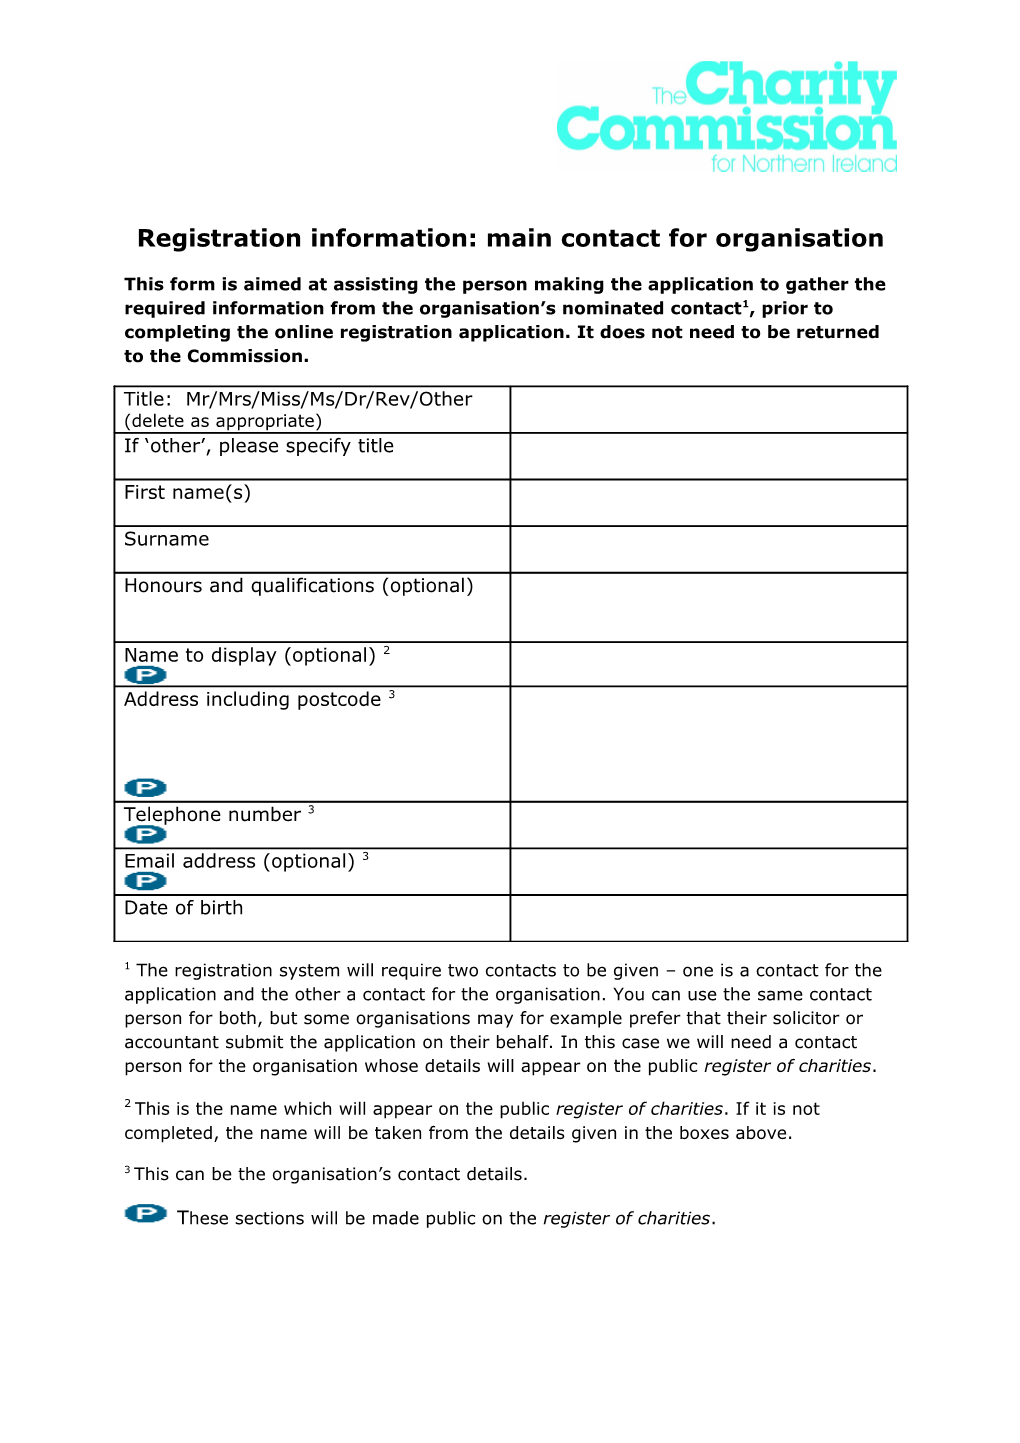 Registration Information: Main Contact for Organisation